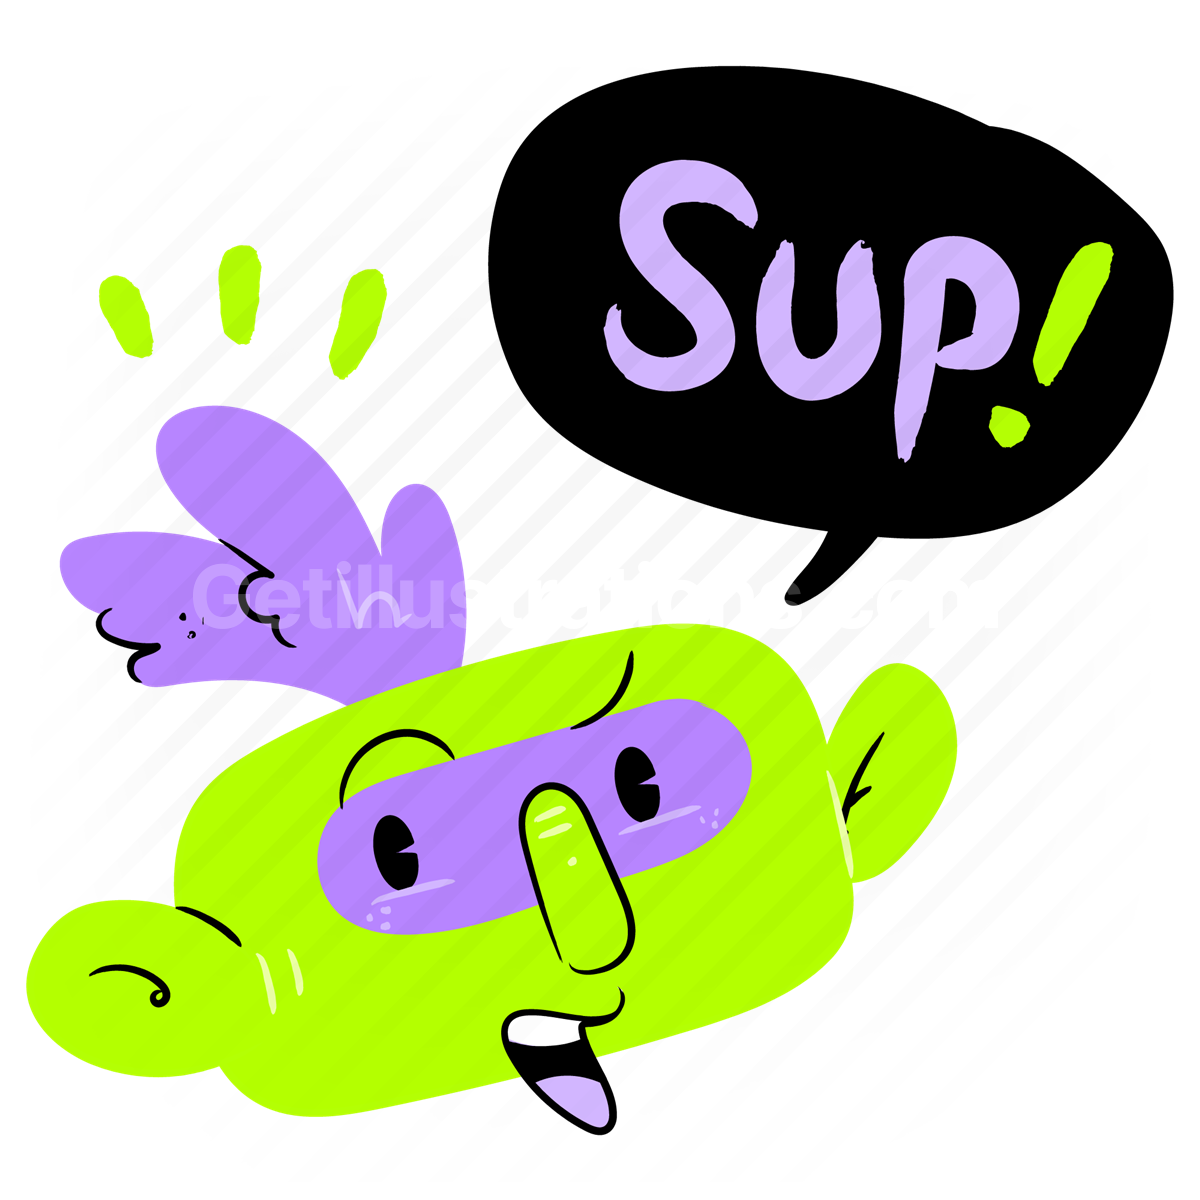 greeting, sup, sticker, character, animal, greetings